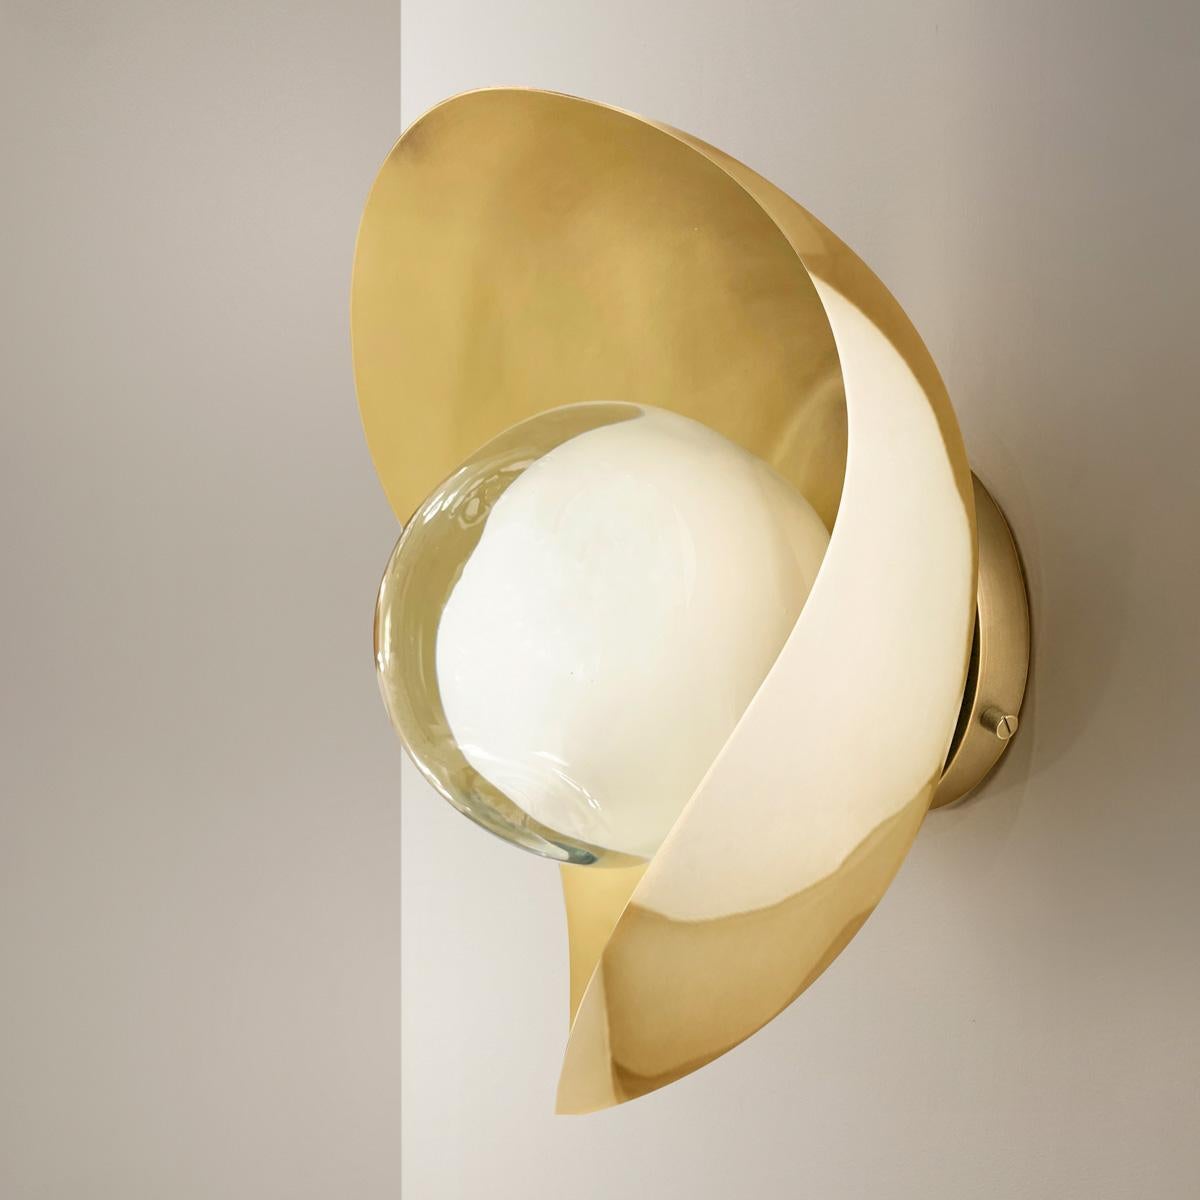 Perla Wall Light by Gaspare Asaro-Brass Finish In New Condition For Sale In New York, NY